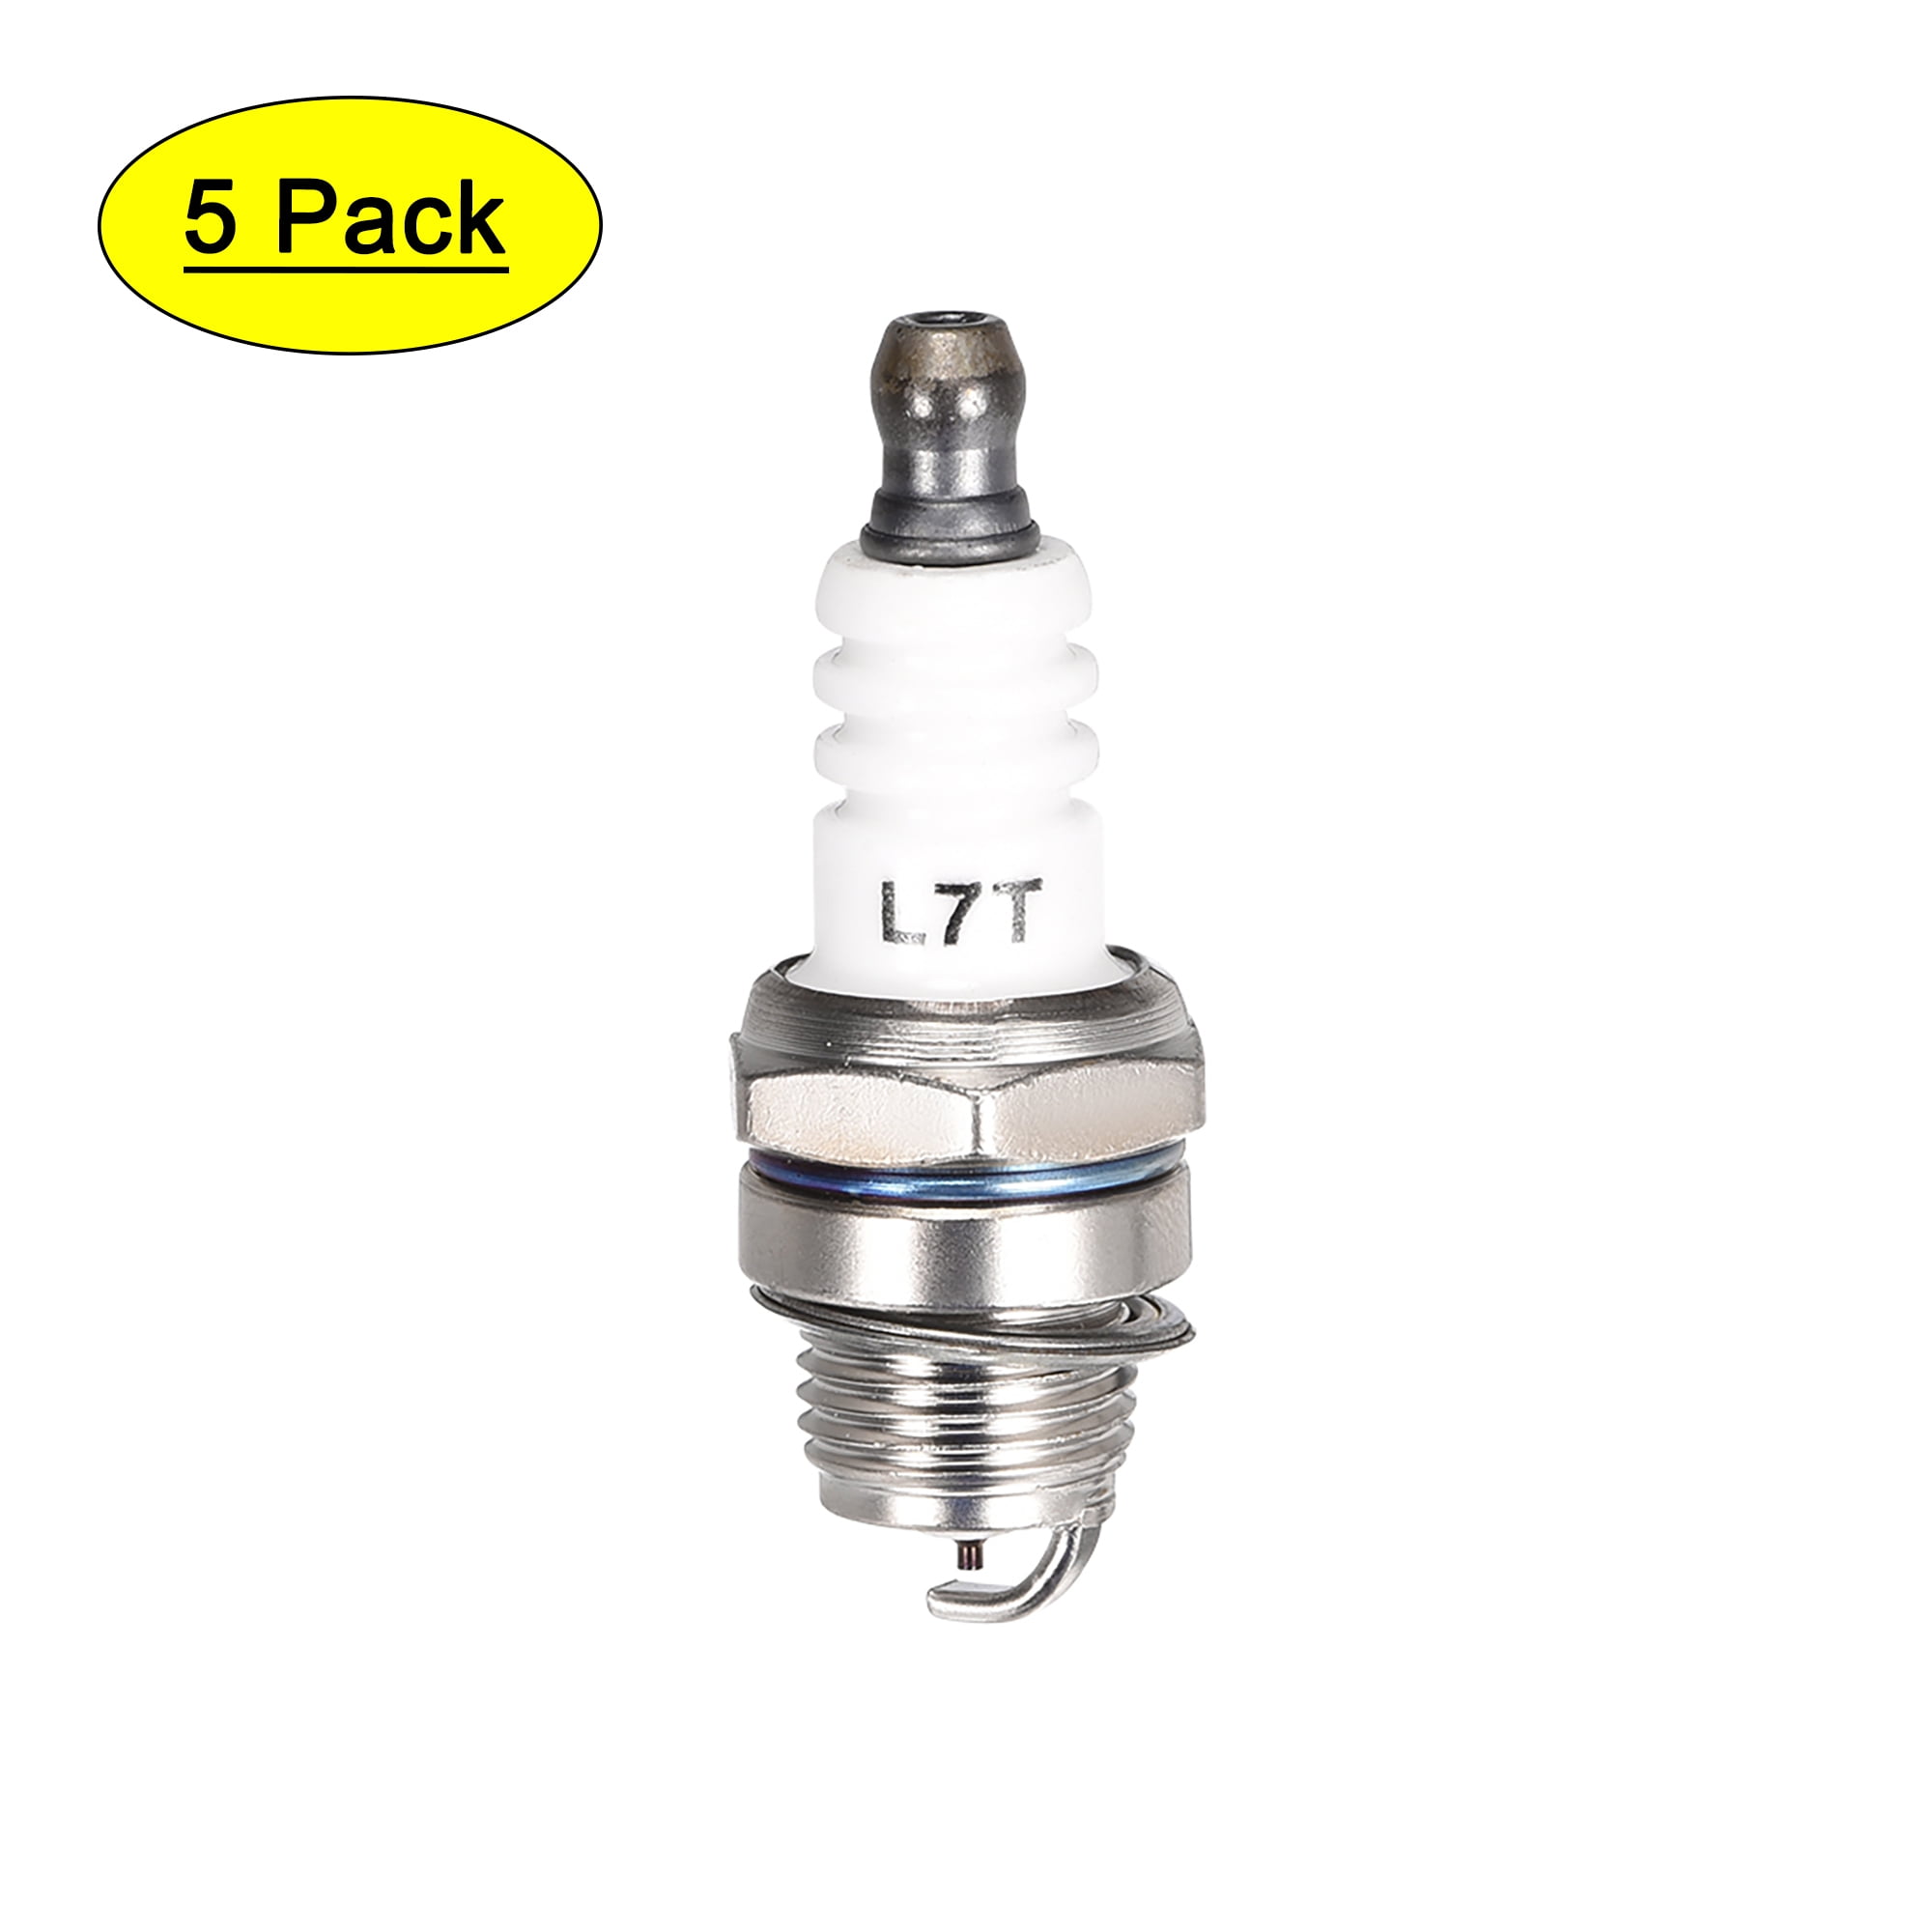 2-Stroke Spark Plug TORCH L7T for All Brands 